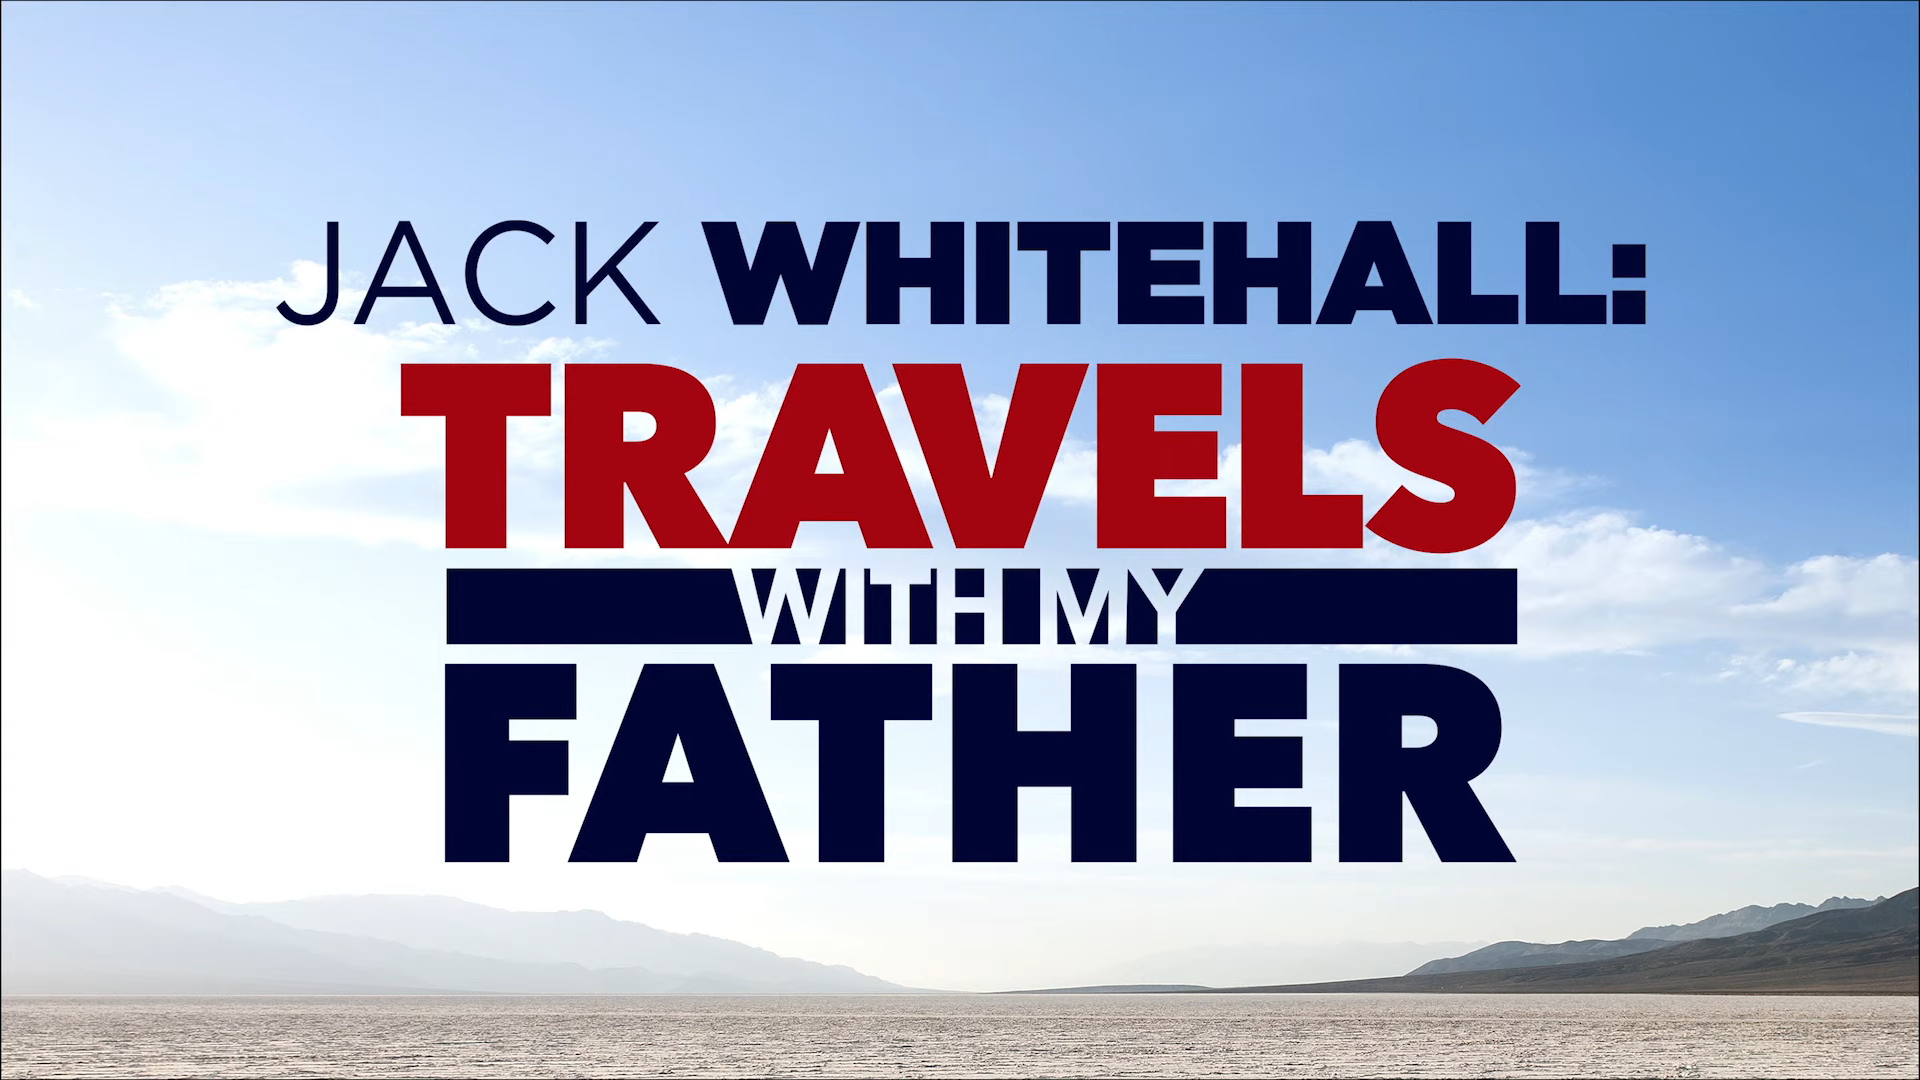 Jack Whitehall Travels With My Father Season 3 Trailer, Netflix Comedy Series, Netflix Documentary Series, Coming to Netflix in September 2019